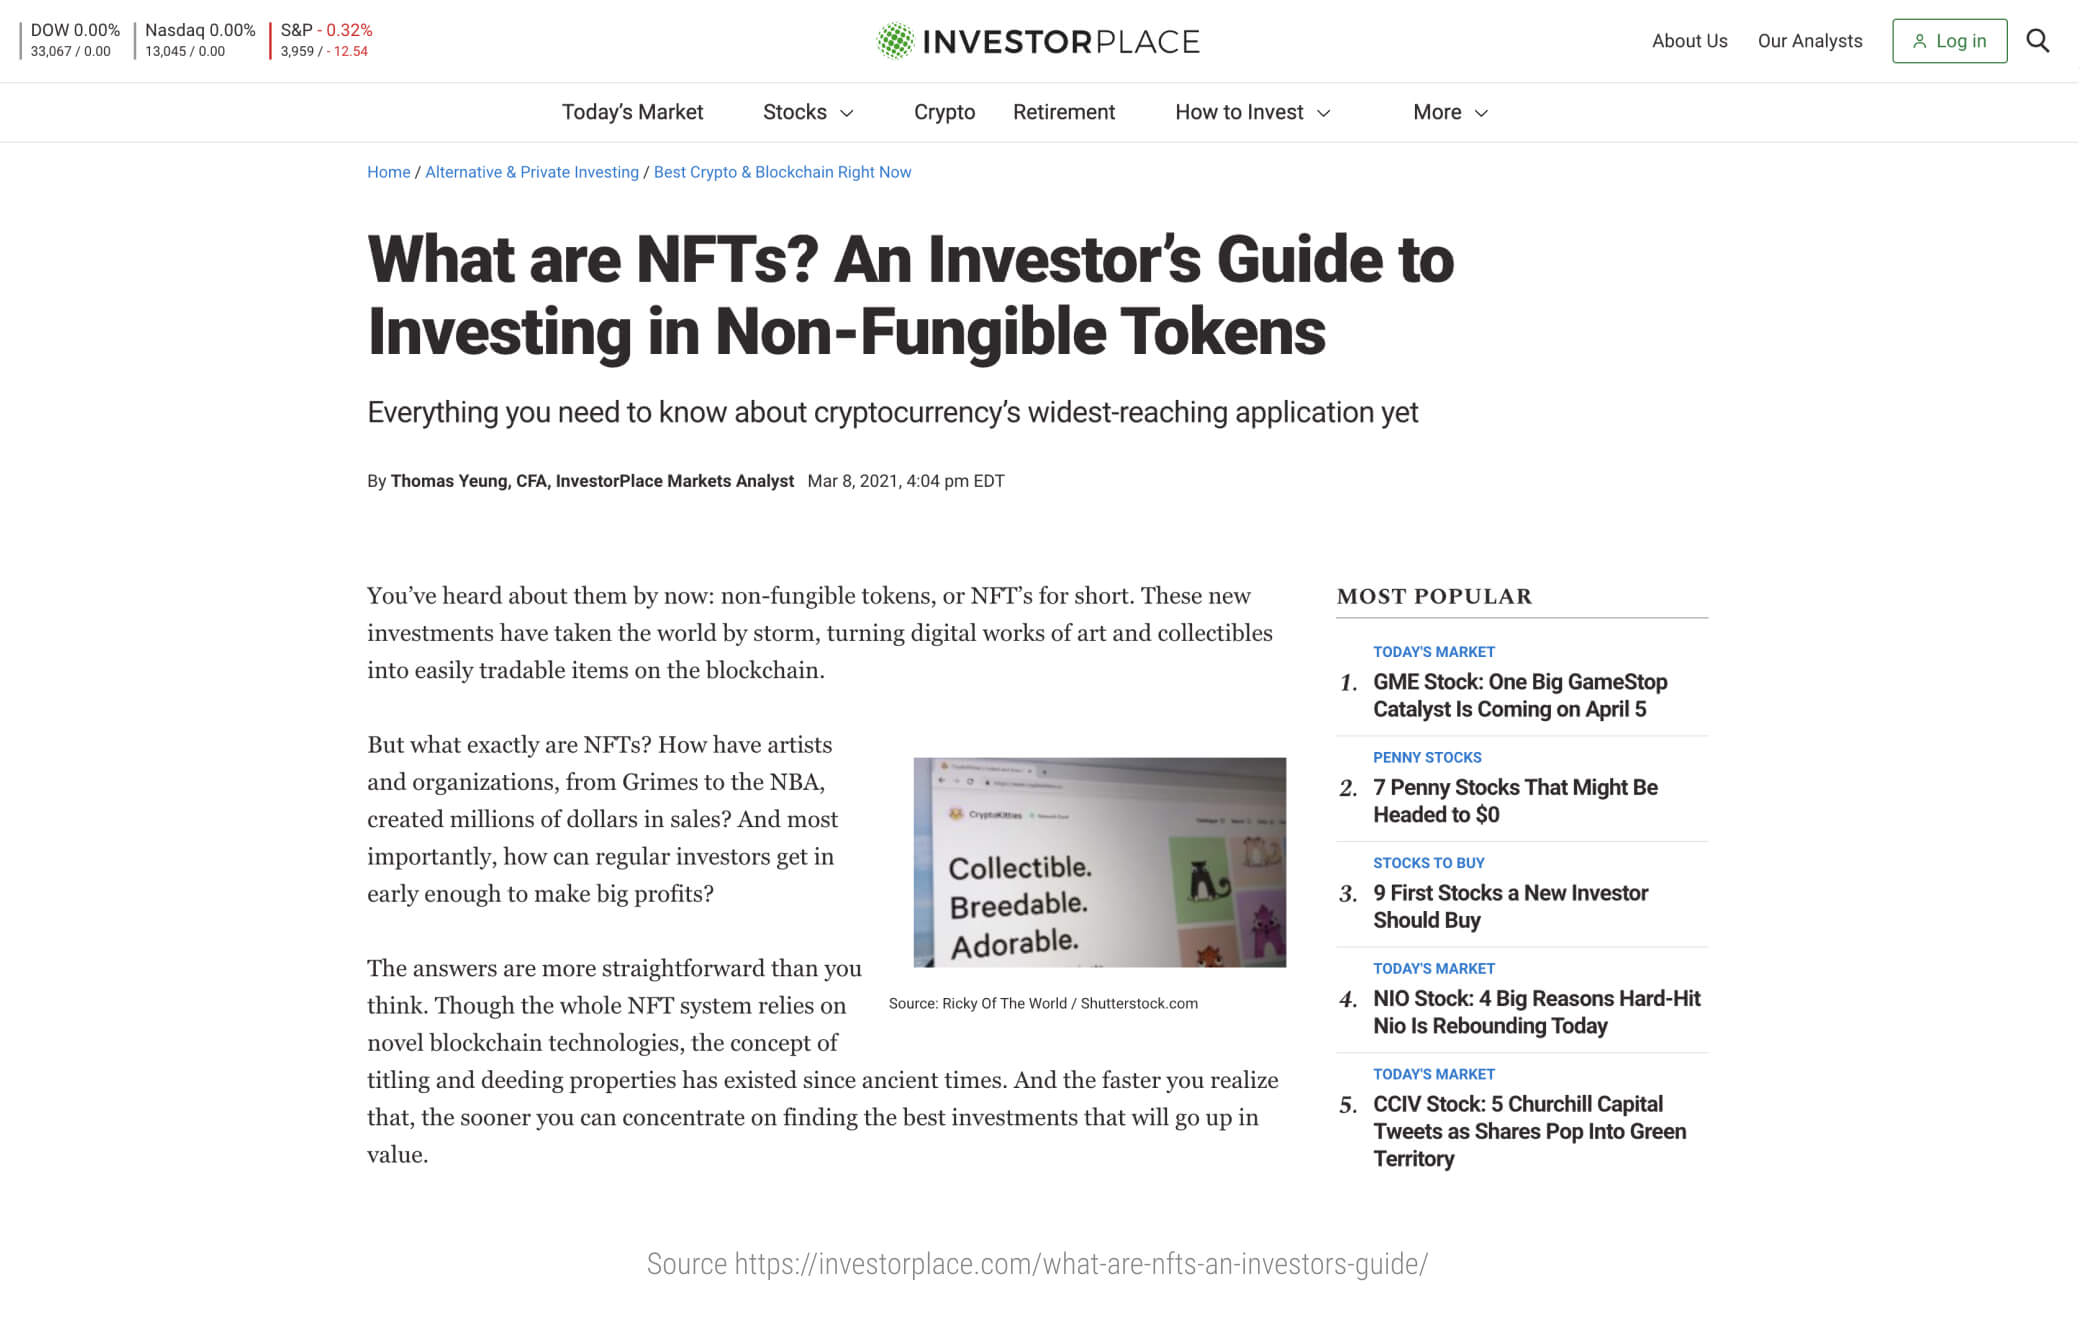 What-are-NFTs_-An-Investor-s-Guide-to-Investing-in-Non-Fungible-Tokens